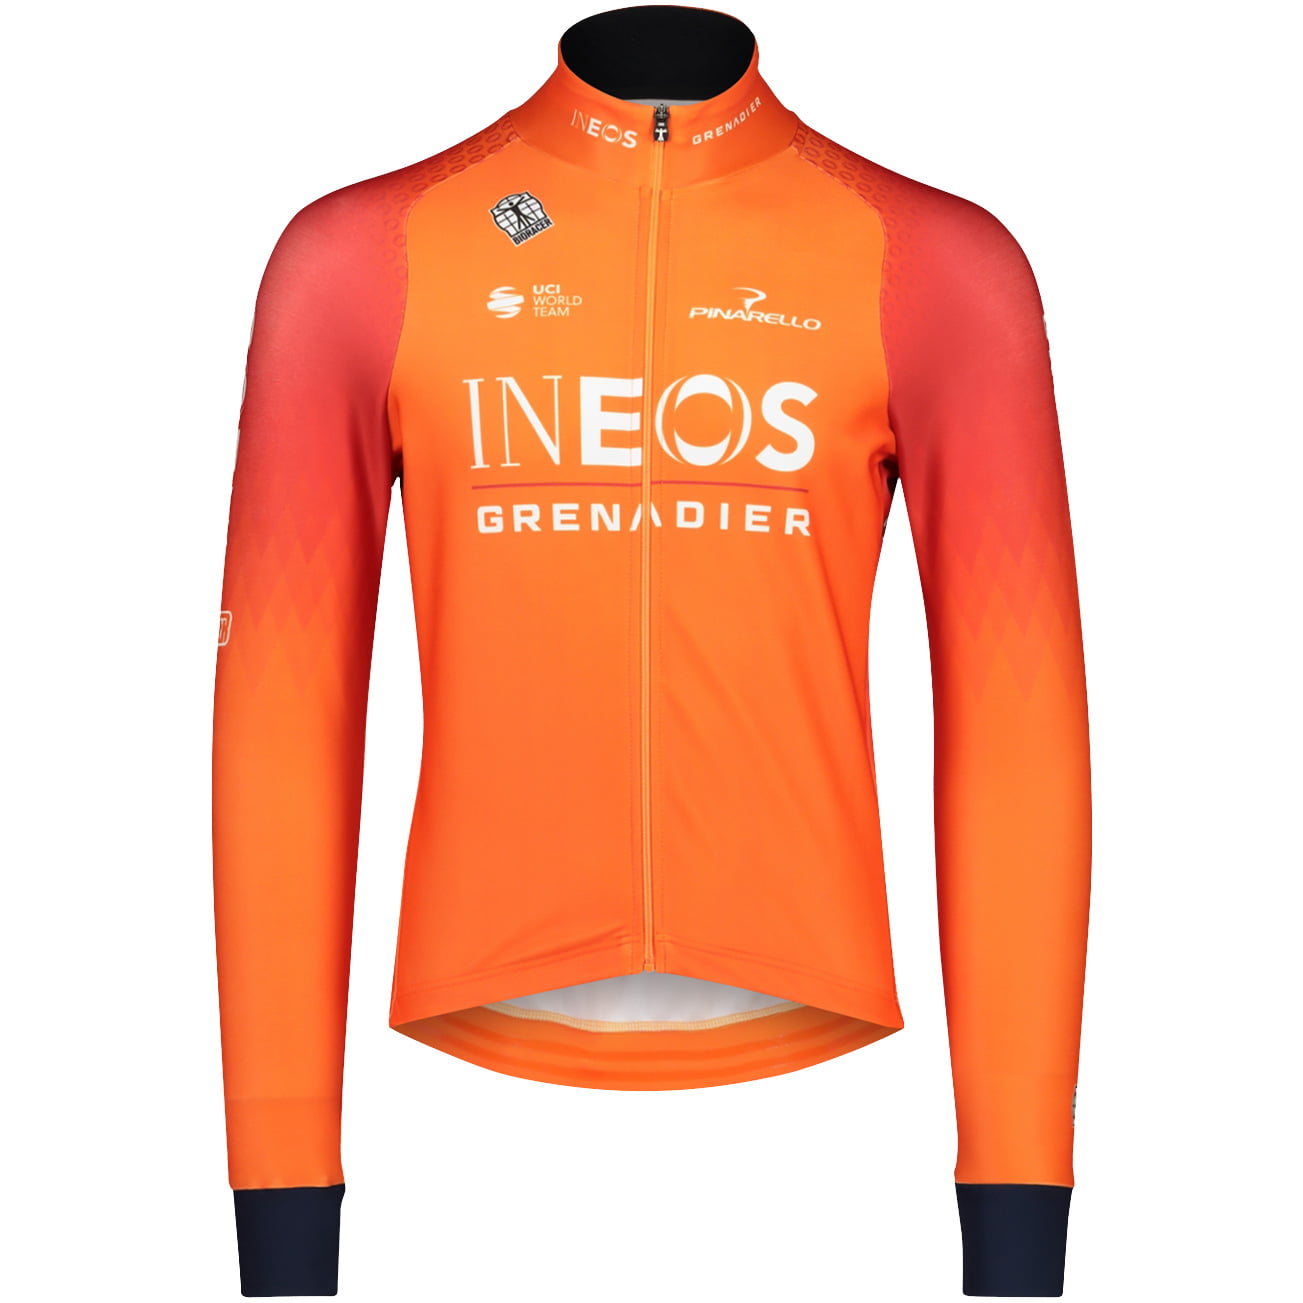 INEOS Grenadiers Jersey Jacket Icon Tempest Training 2022 Jersey / Jacket, for men, size 3XL, Winter jacket, Cycling clothes